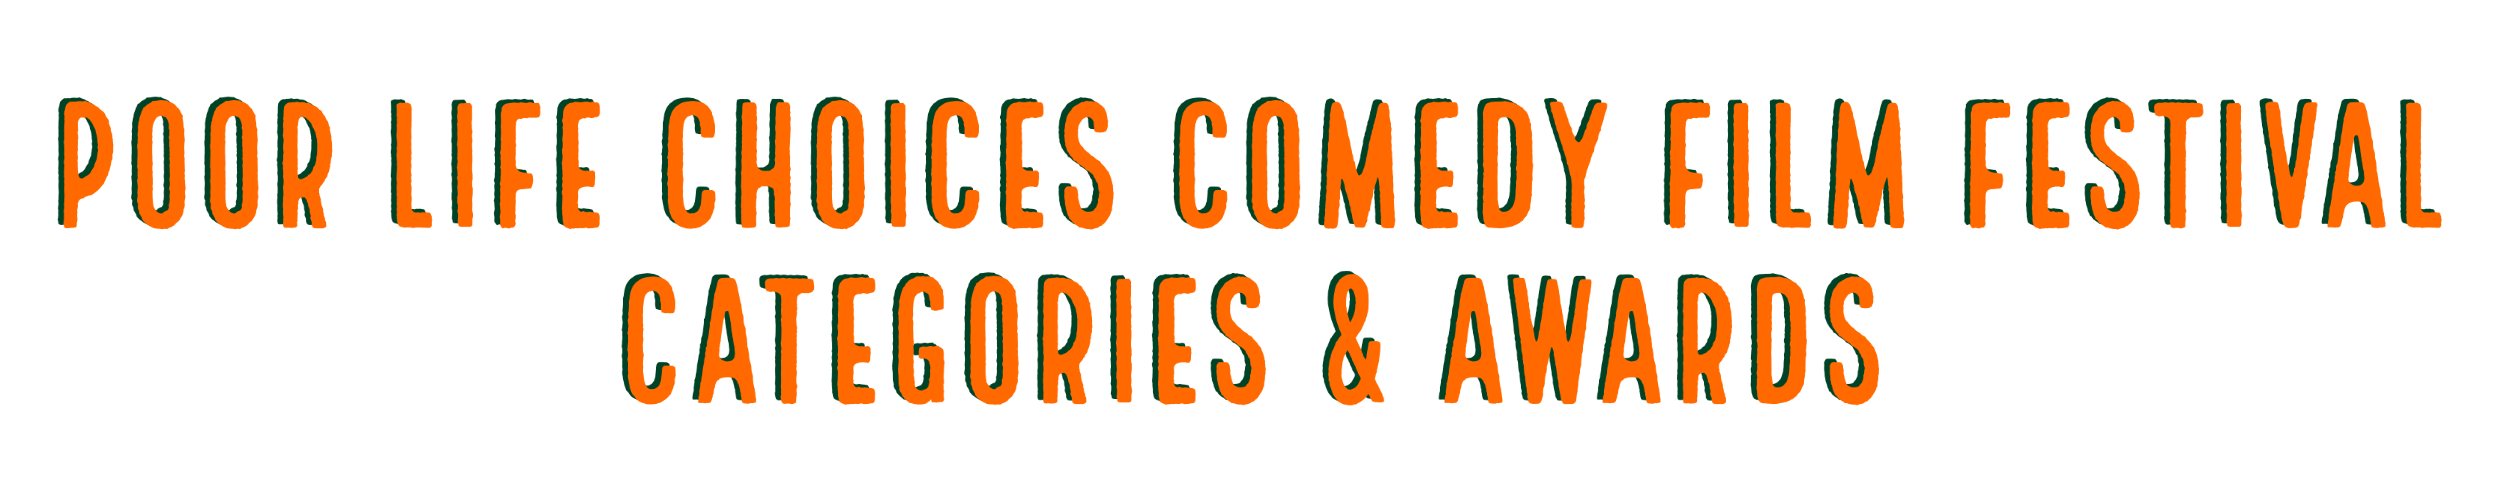 POOR LIFE CHOICES COMEDY FILM FESTIVAL CATEGORIES & AWARDS